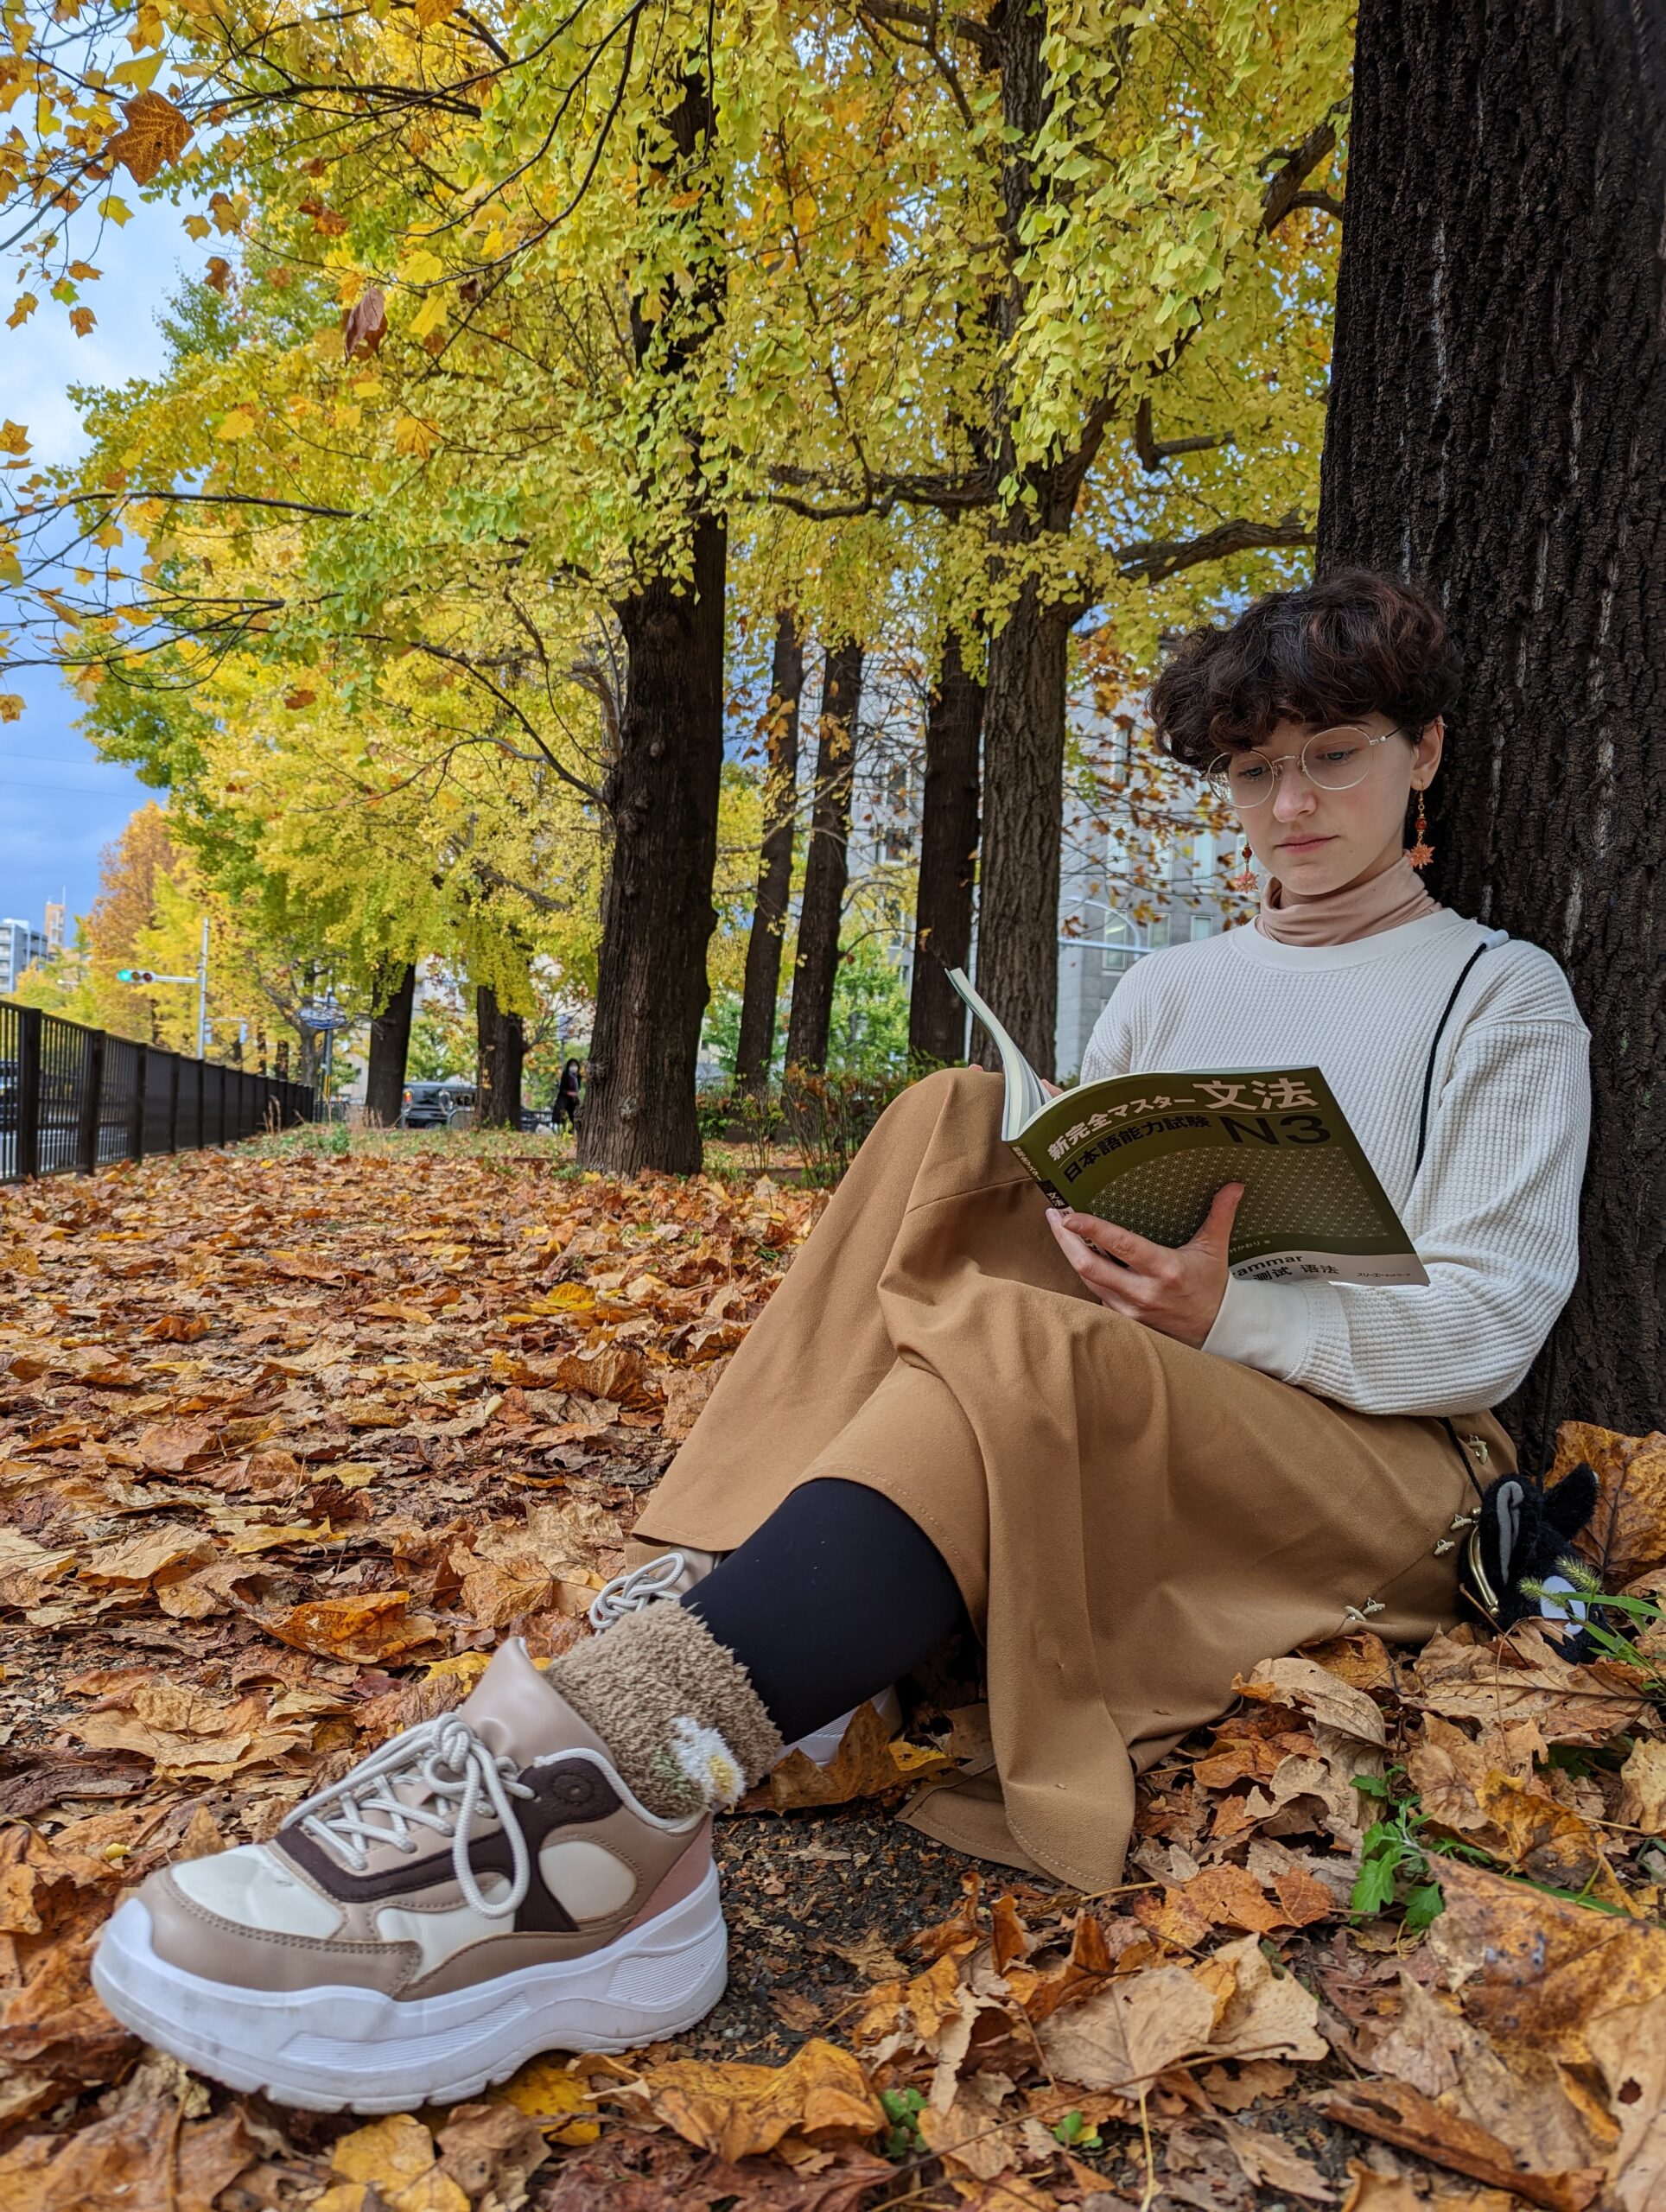 Studying by the leaves